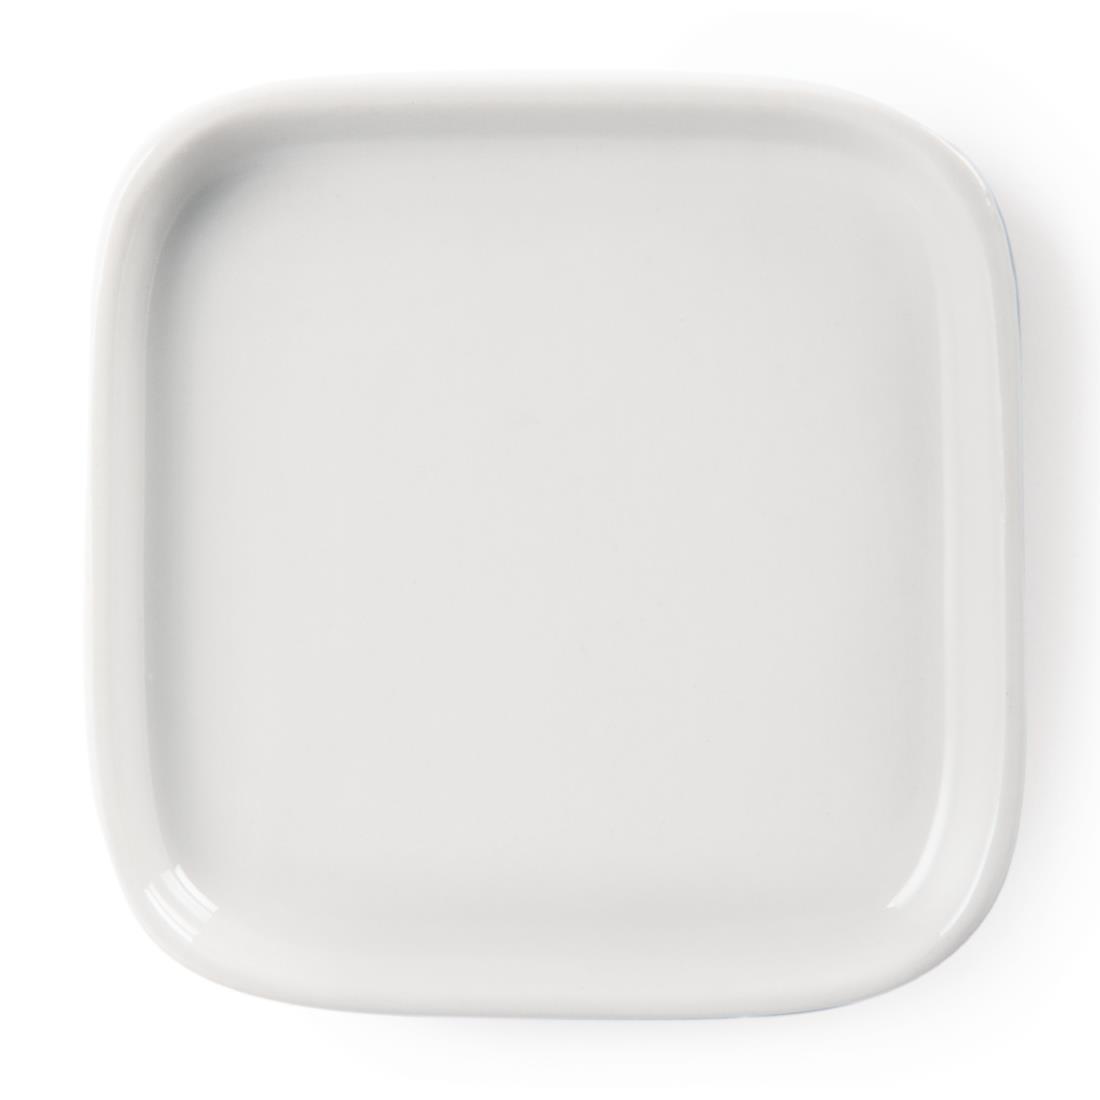 Olympia Flat Miniature Dishes 93mm (Pack of 12) - Y140  - 2